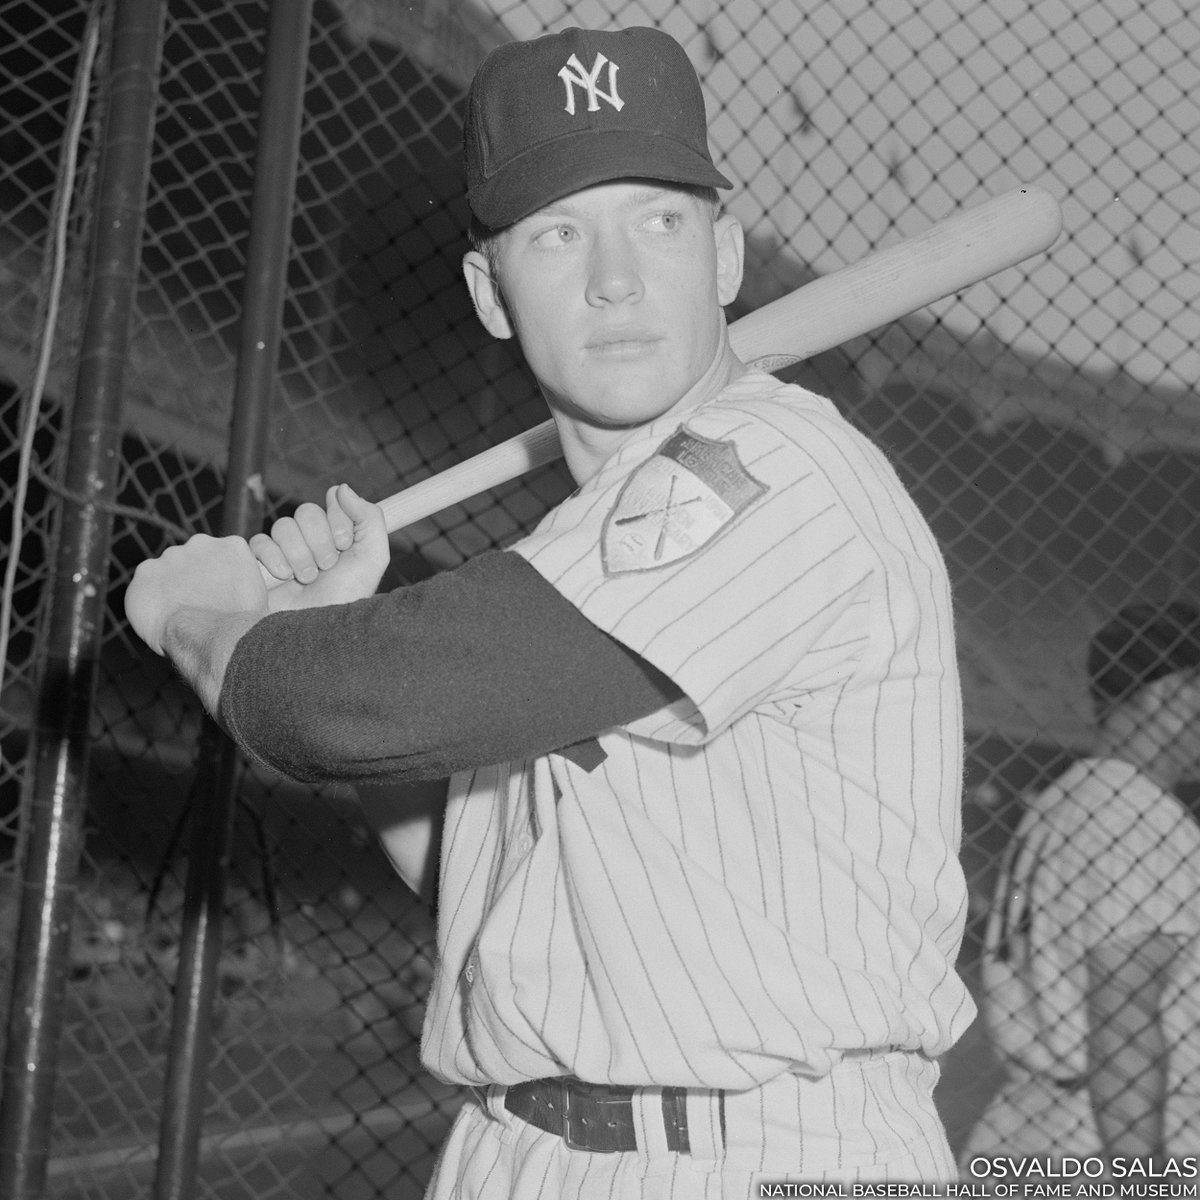 “It was all I lived for, to play baseball.” Mickey Mantle debuted for the @Yankees #OTD in 1951, beginning his Hall of Fame career. Exactly two years later, he hit a home run estimated to have traveled an astounding 565 feet. ow.ly/ce4B50Ri3Wx